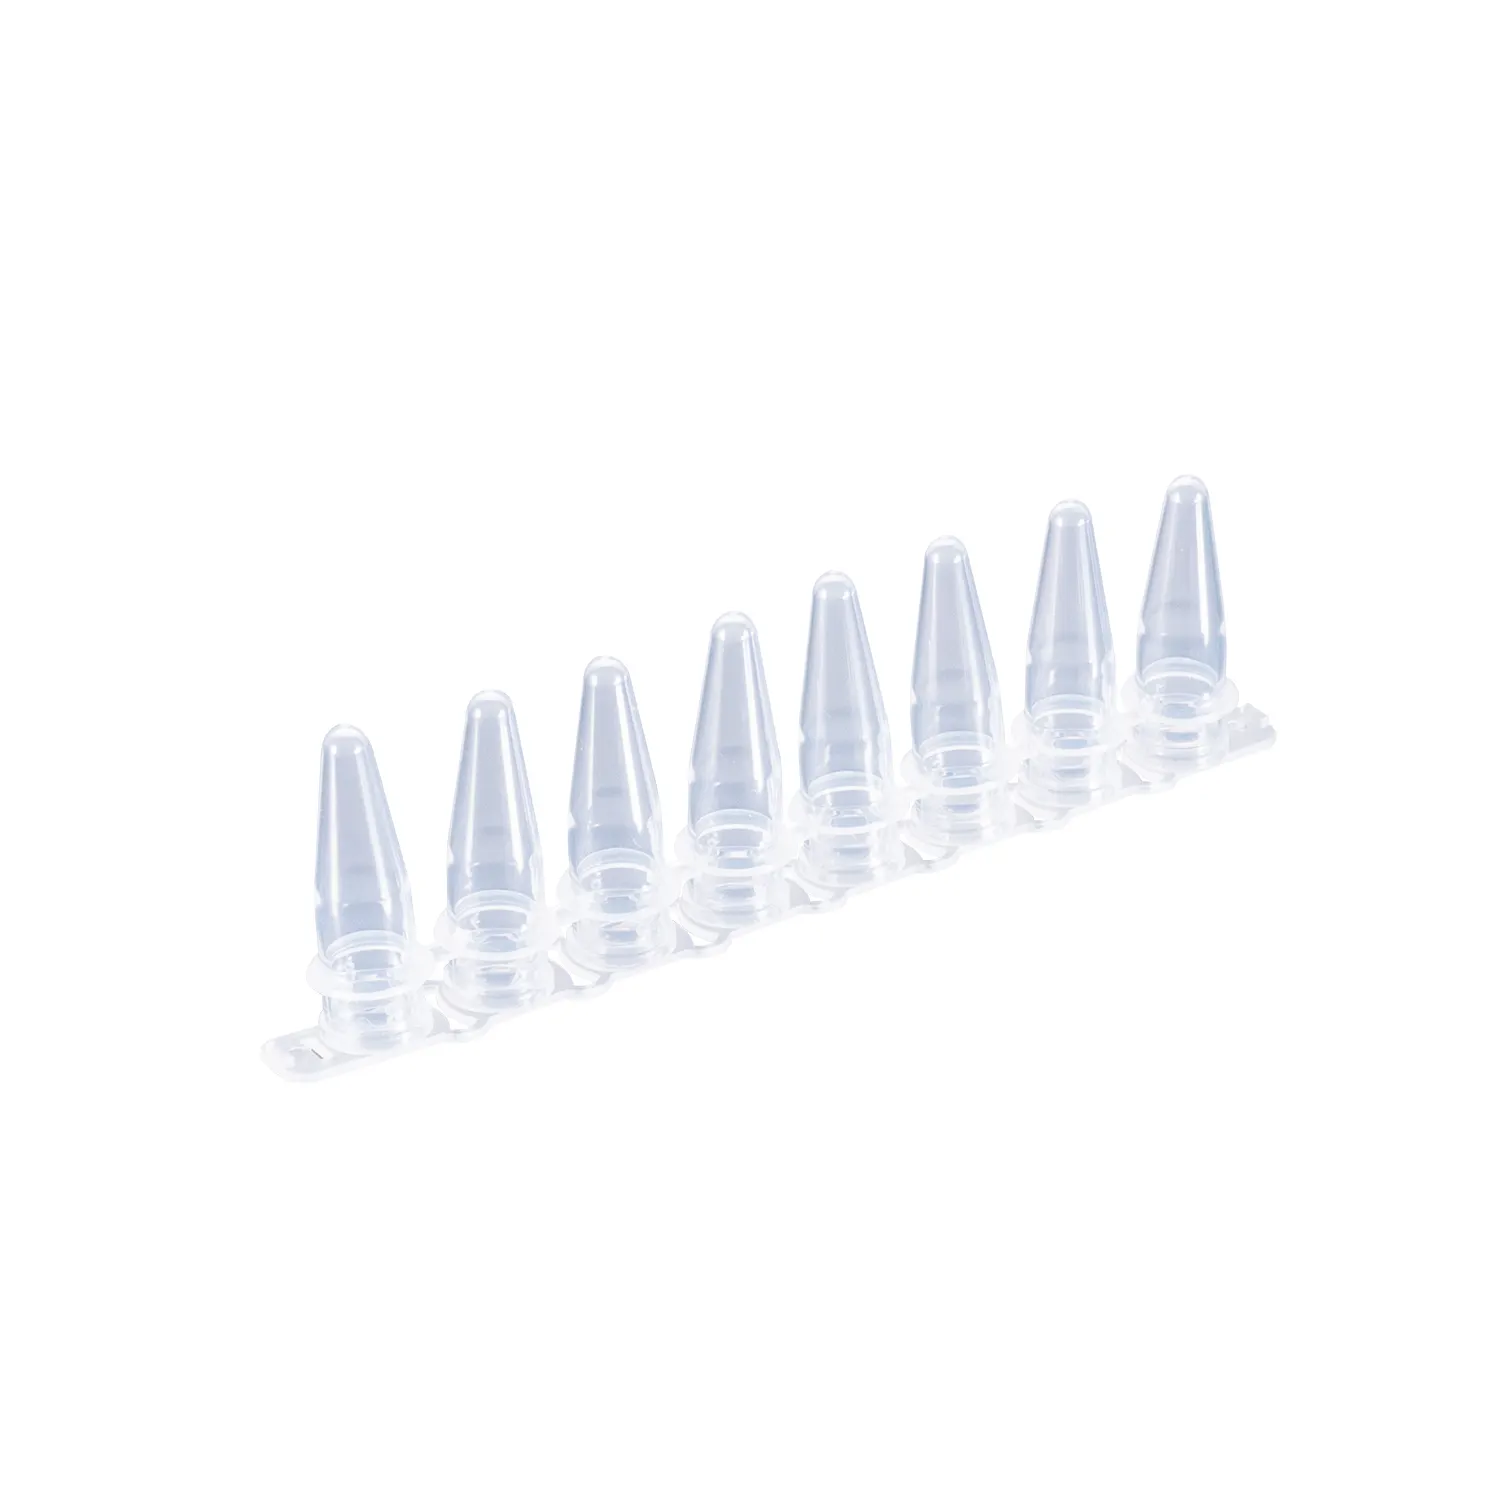 PP material PCR 0.2ml 8-strip tube with cover PCR tube (polypropylene, lab consumable)